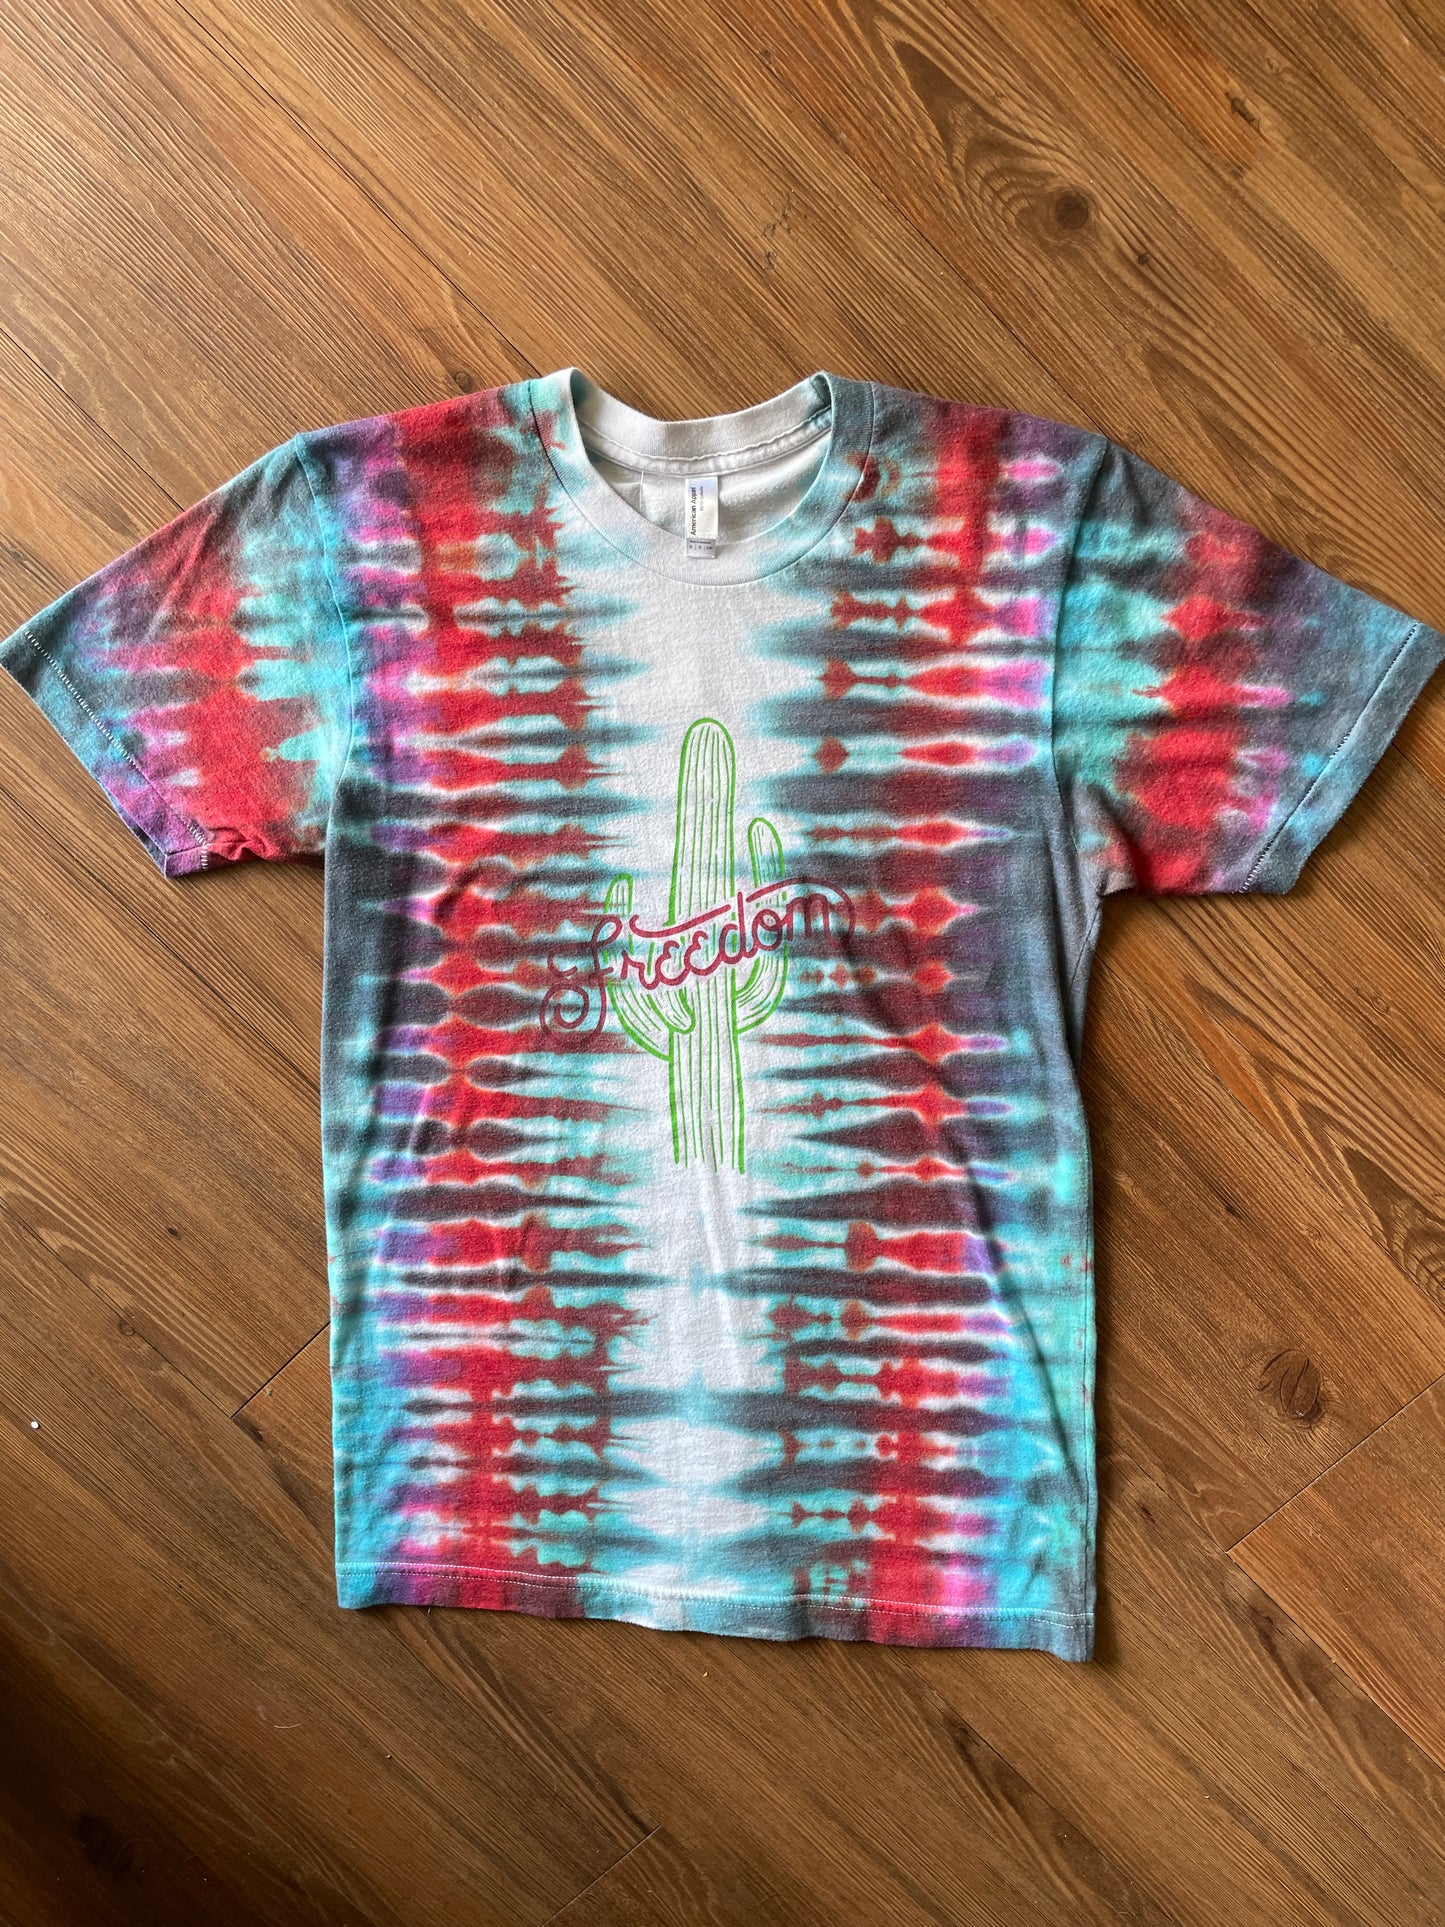 SMALL Unisex American Apparel Freedom Handmade Tie Dye T-Shirt | One-Of-a-Kind Red, Blue, and Gray Pleated Short Sleeve